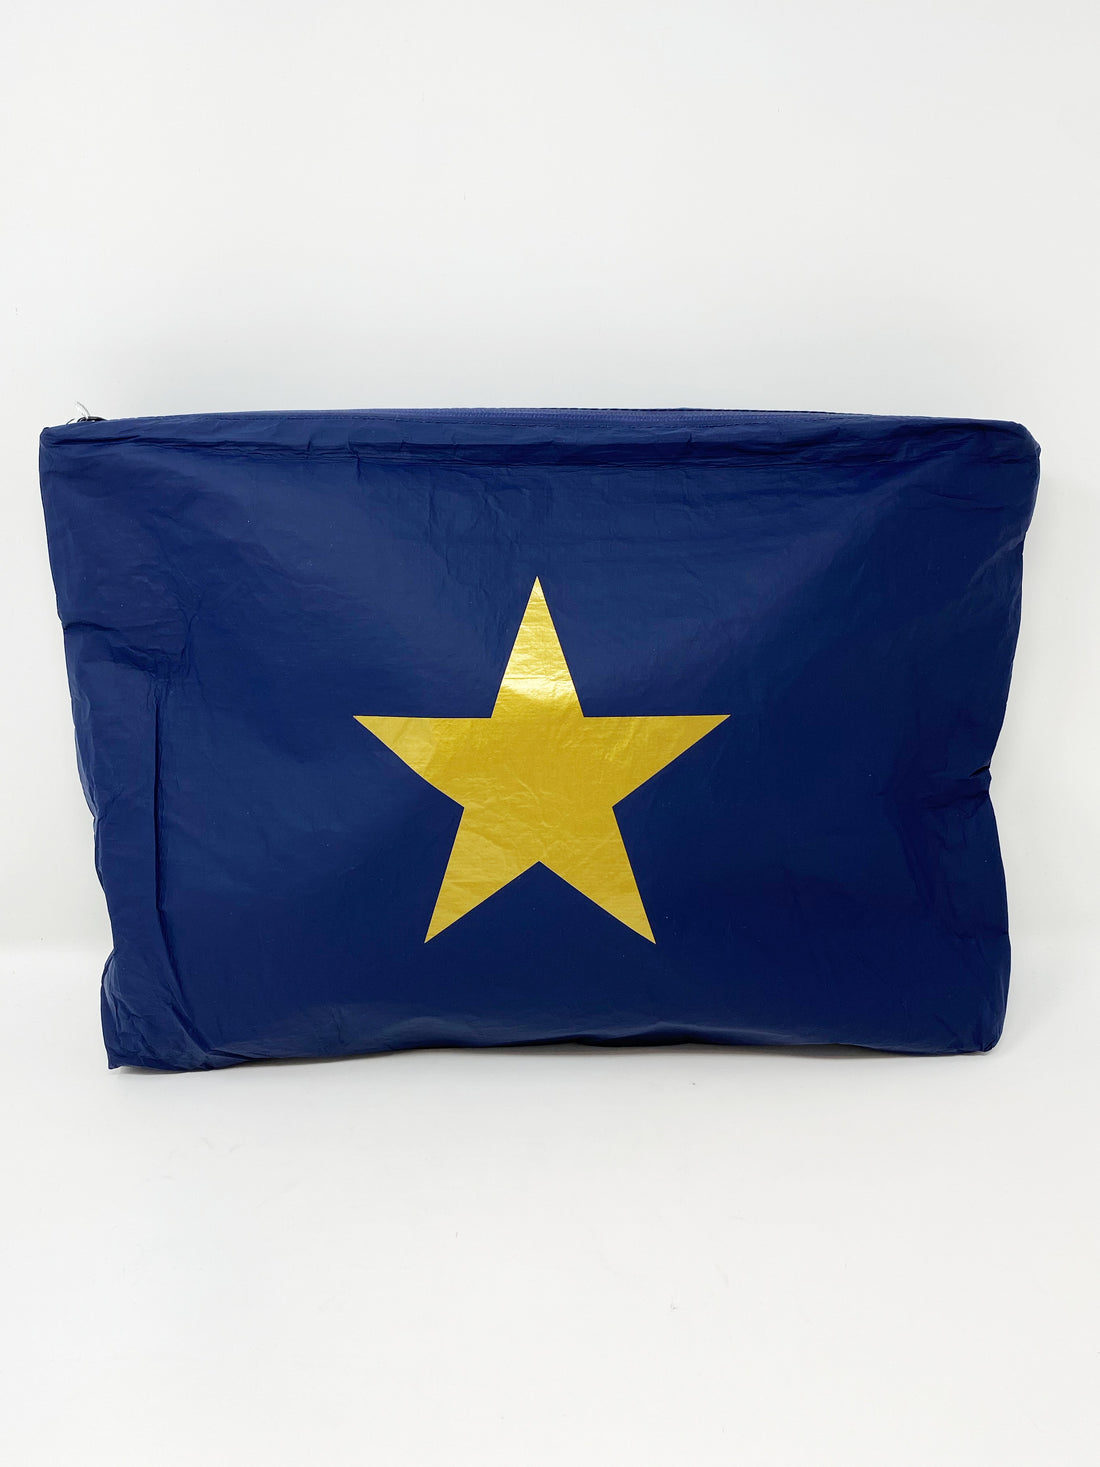 Hi Love Travel JUMBO Pouch in Navy with Metallic Gold Star